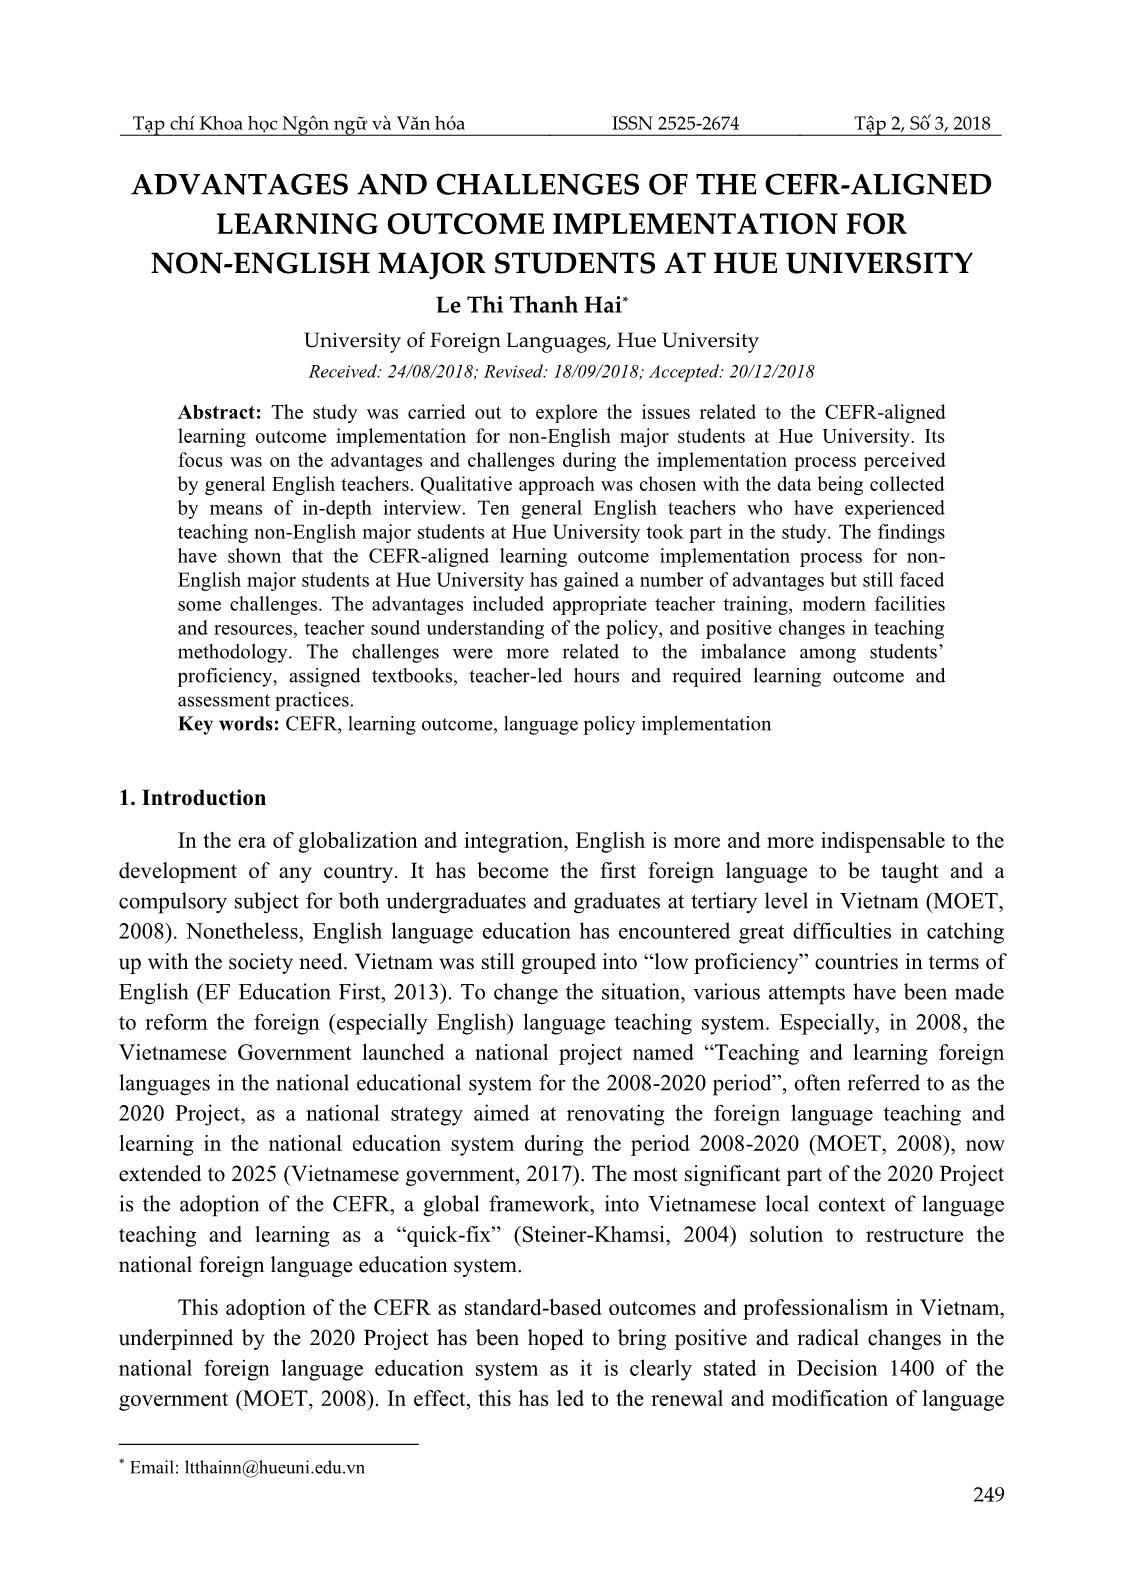 Advantages and challenges of the cefr - Aligned learning outcome implementation for non - English major students at hue university trang 1